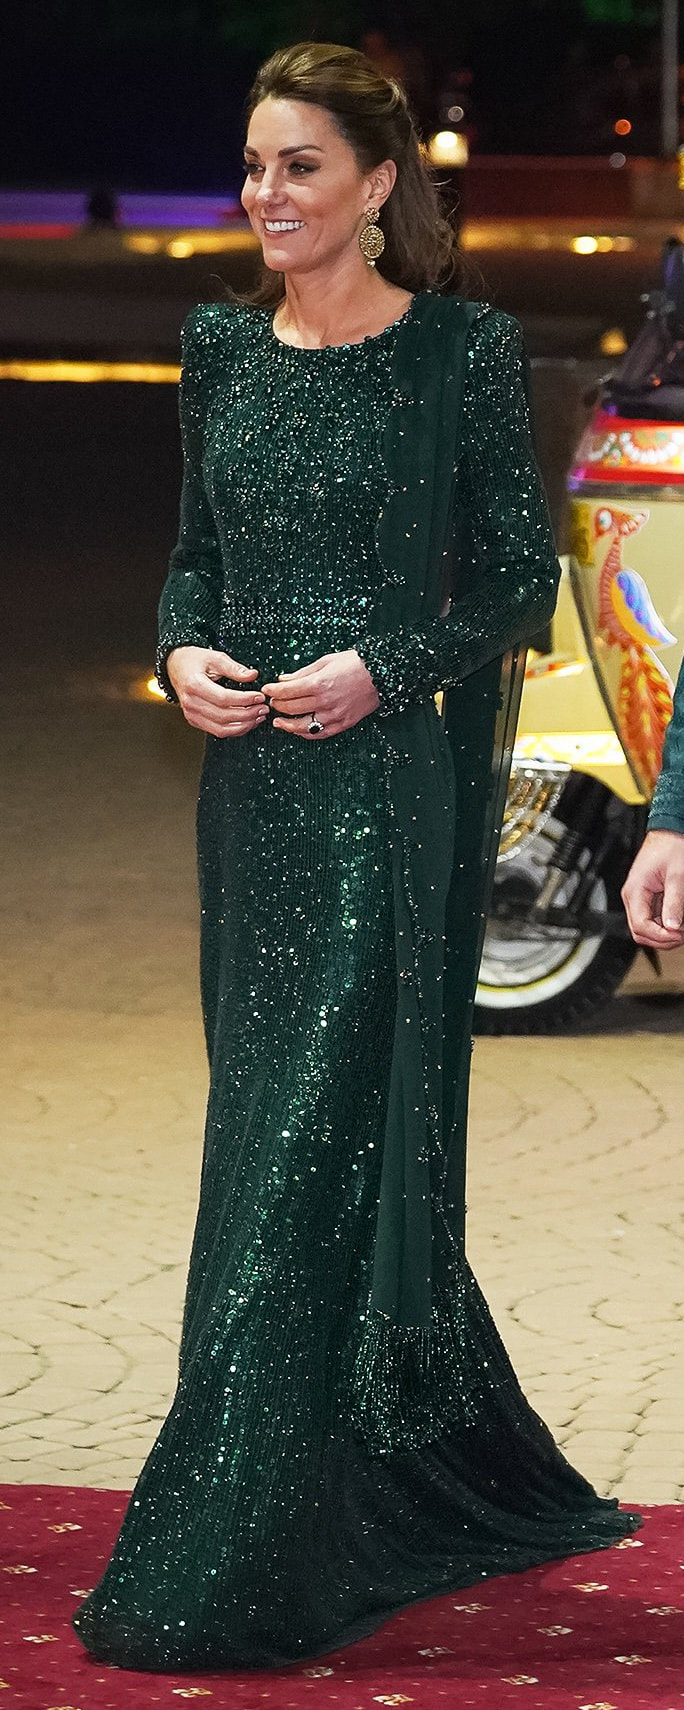 Jenny Packham Tenille Green Sequin Embellished Gown as seen on Kate Middleton, The Duchess of Cambridge.